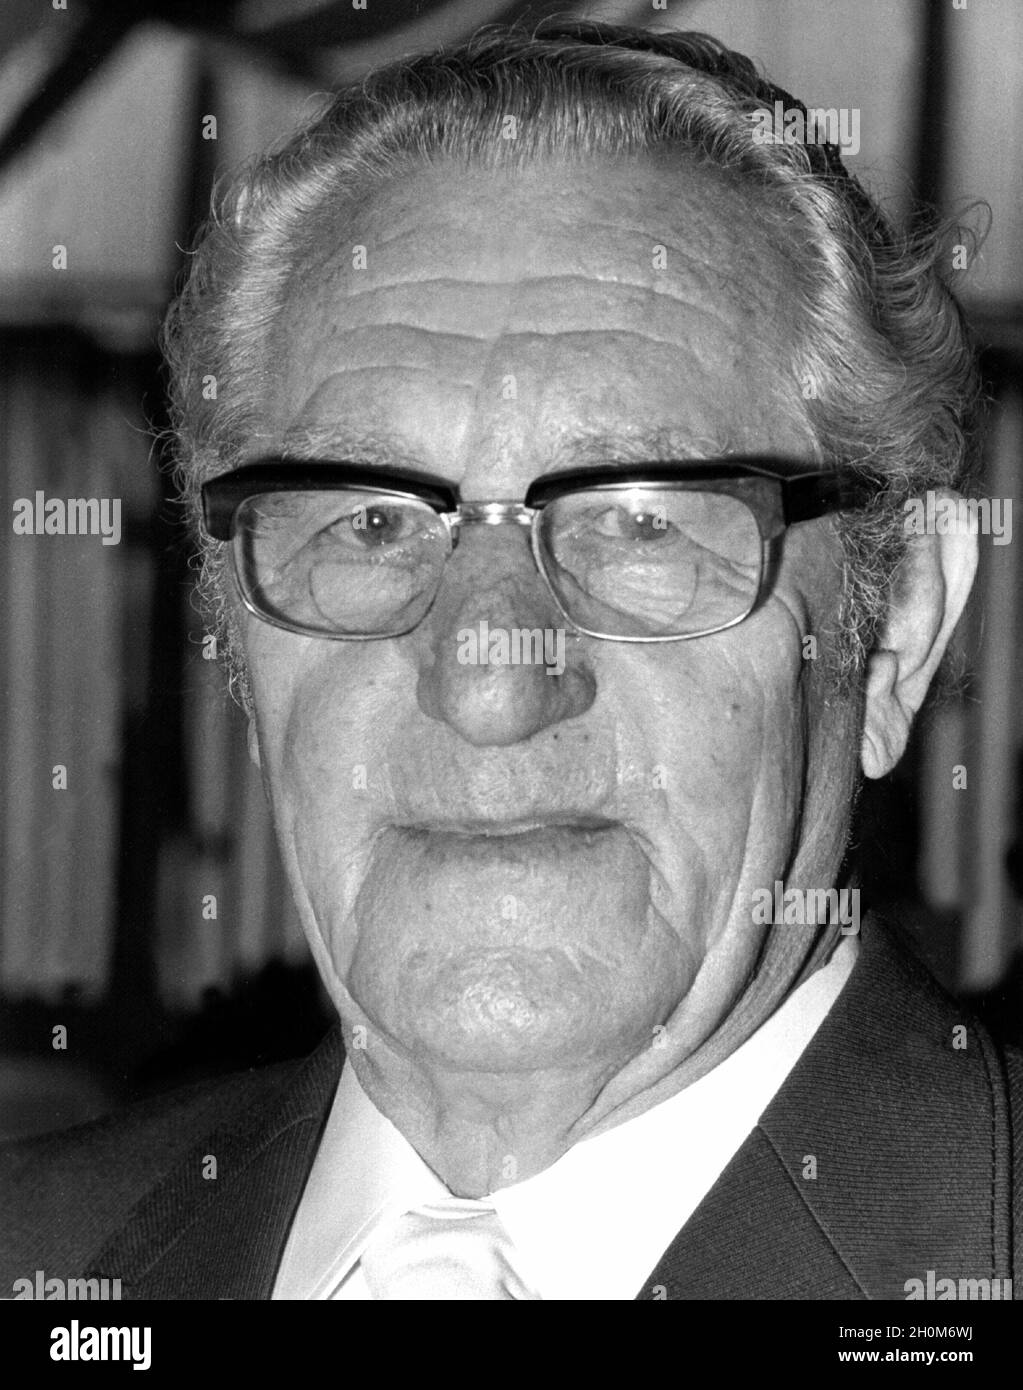 Rudolf 'Rudi' Dassler. Founder and owner of the 'Puma' sports shoe factories in Herzogenaurach near Nuremberg, recorded on April 29, 1973 on the occasion of his 75th birthday, his 50th professional anniversary and the 25th anniversary of his company. Stock Photo